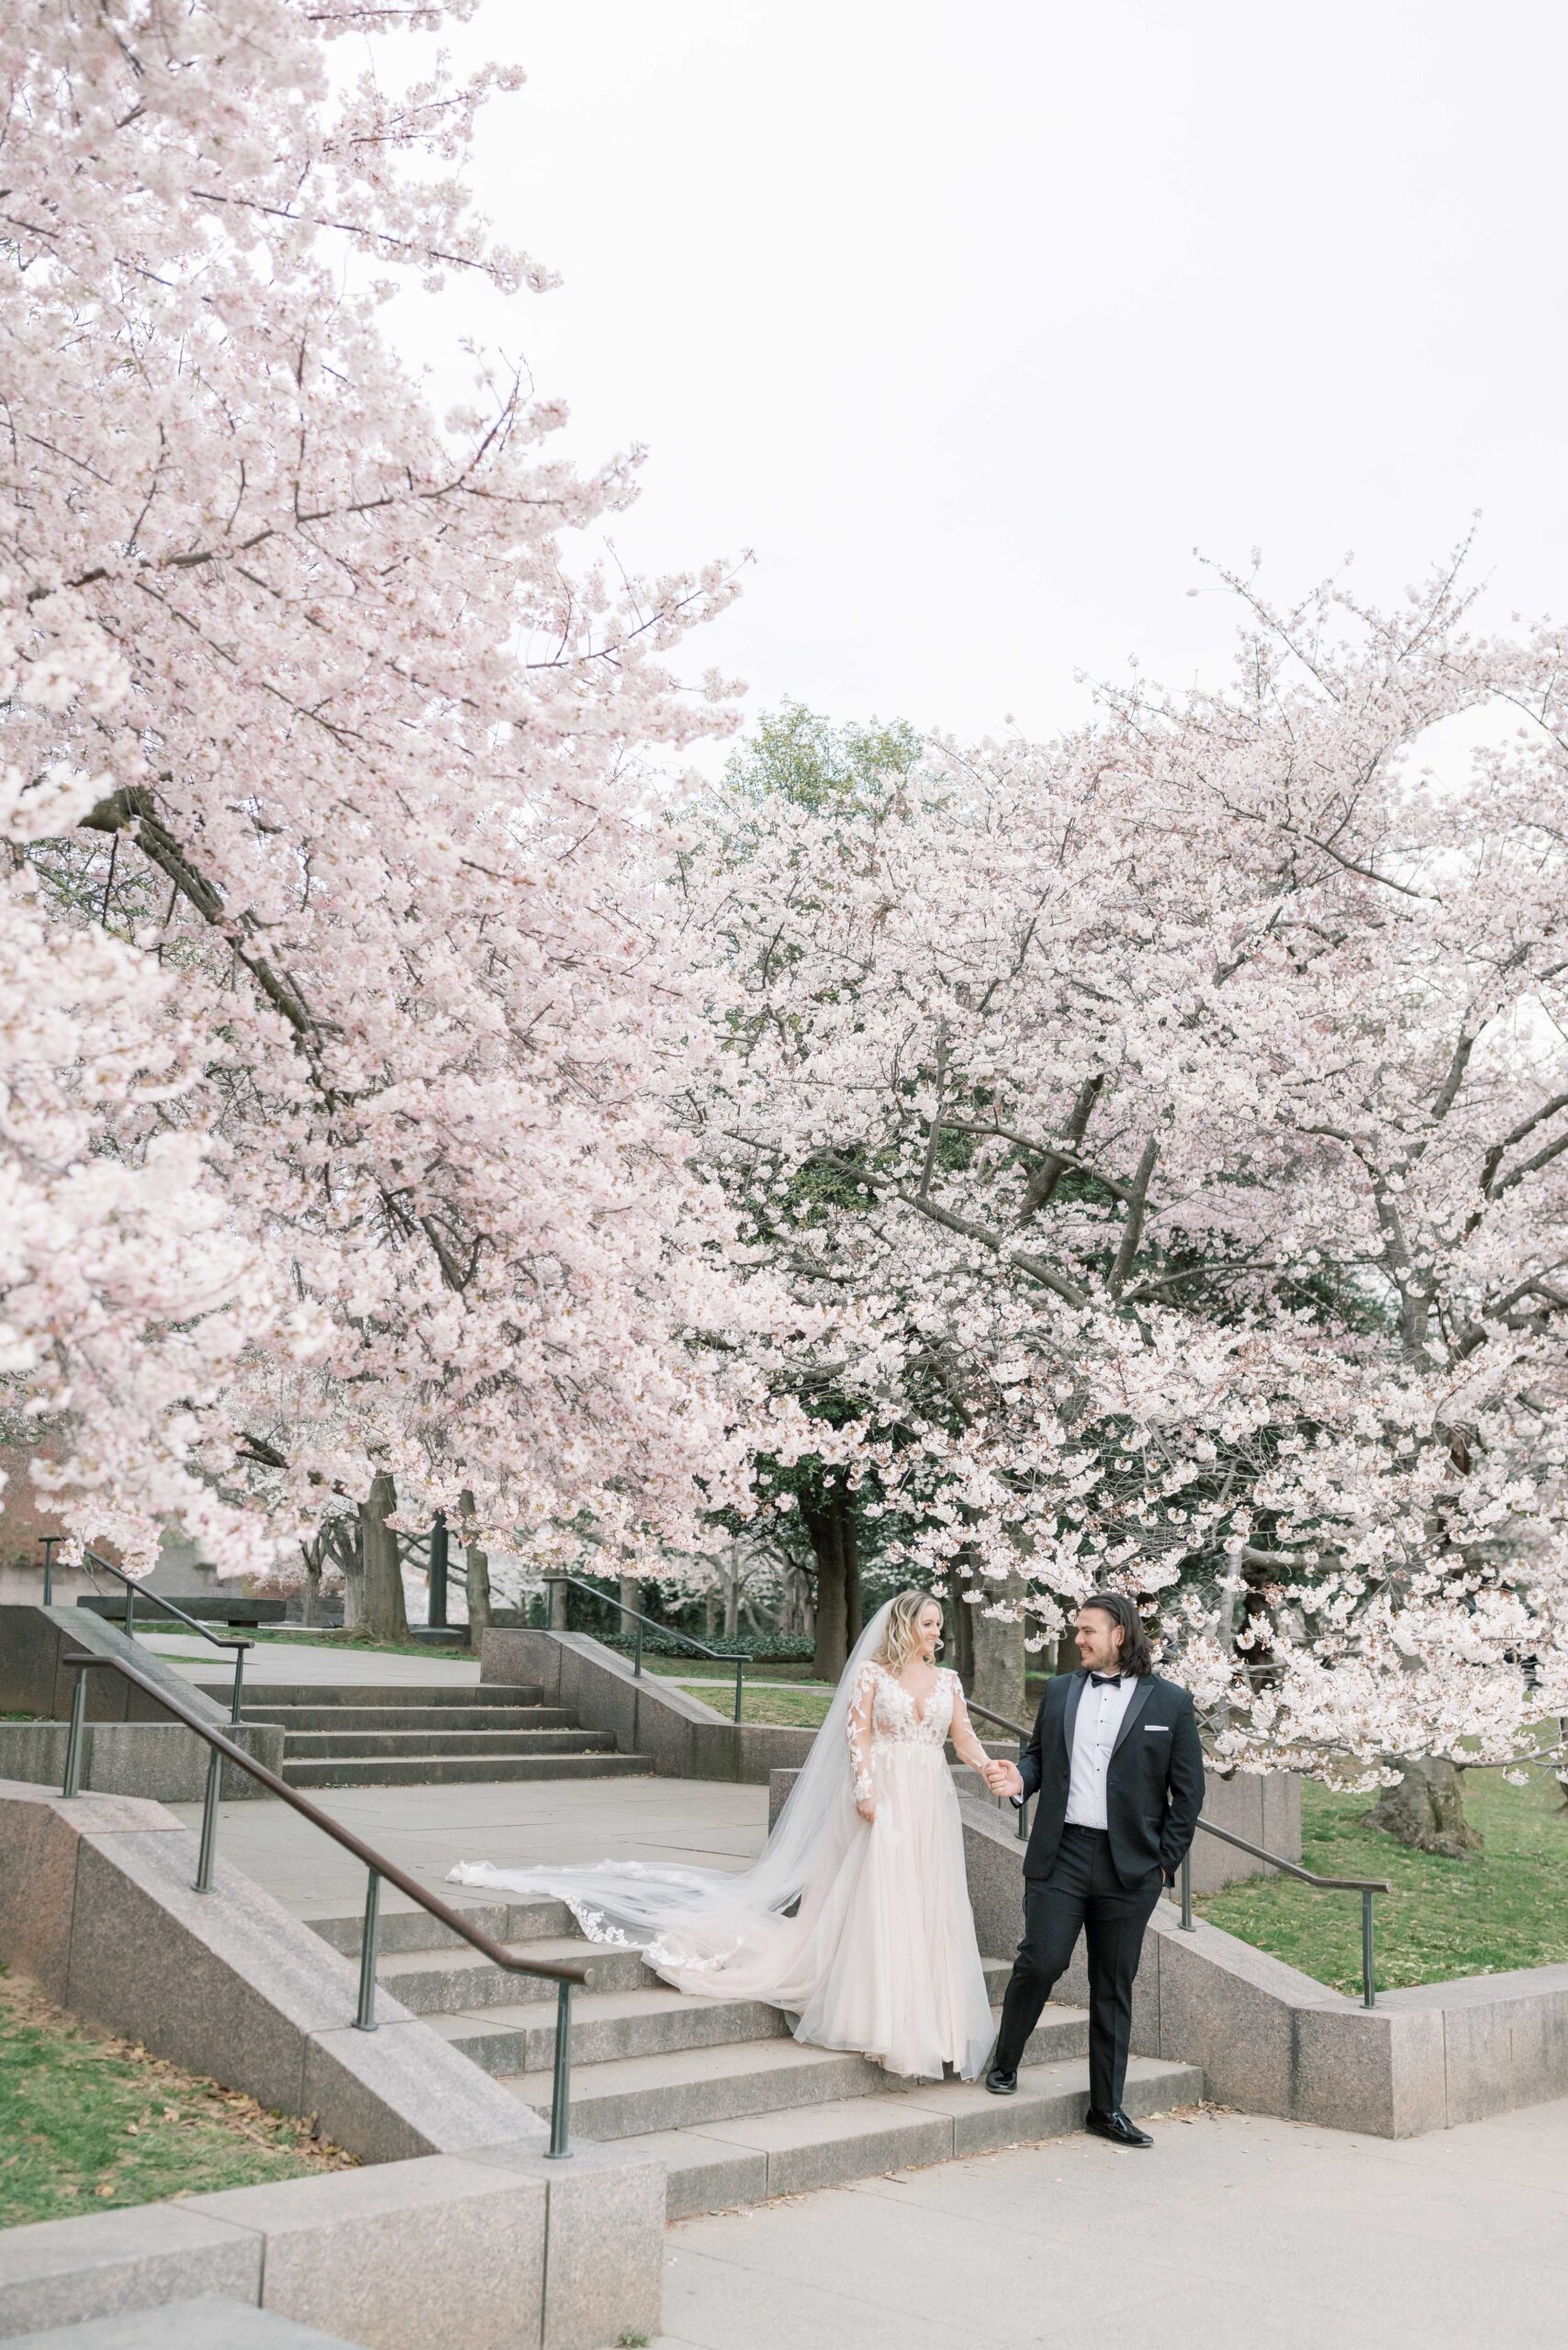 A romantic sunrise portrait session during the peak Cherry Blossom bloom at the Tidal Basin in Washington, DC.